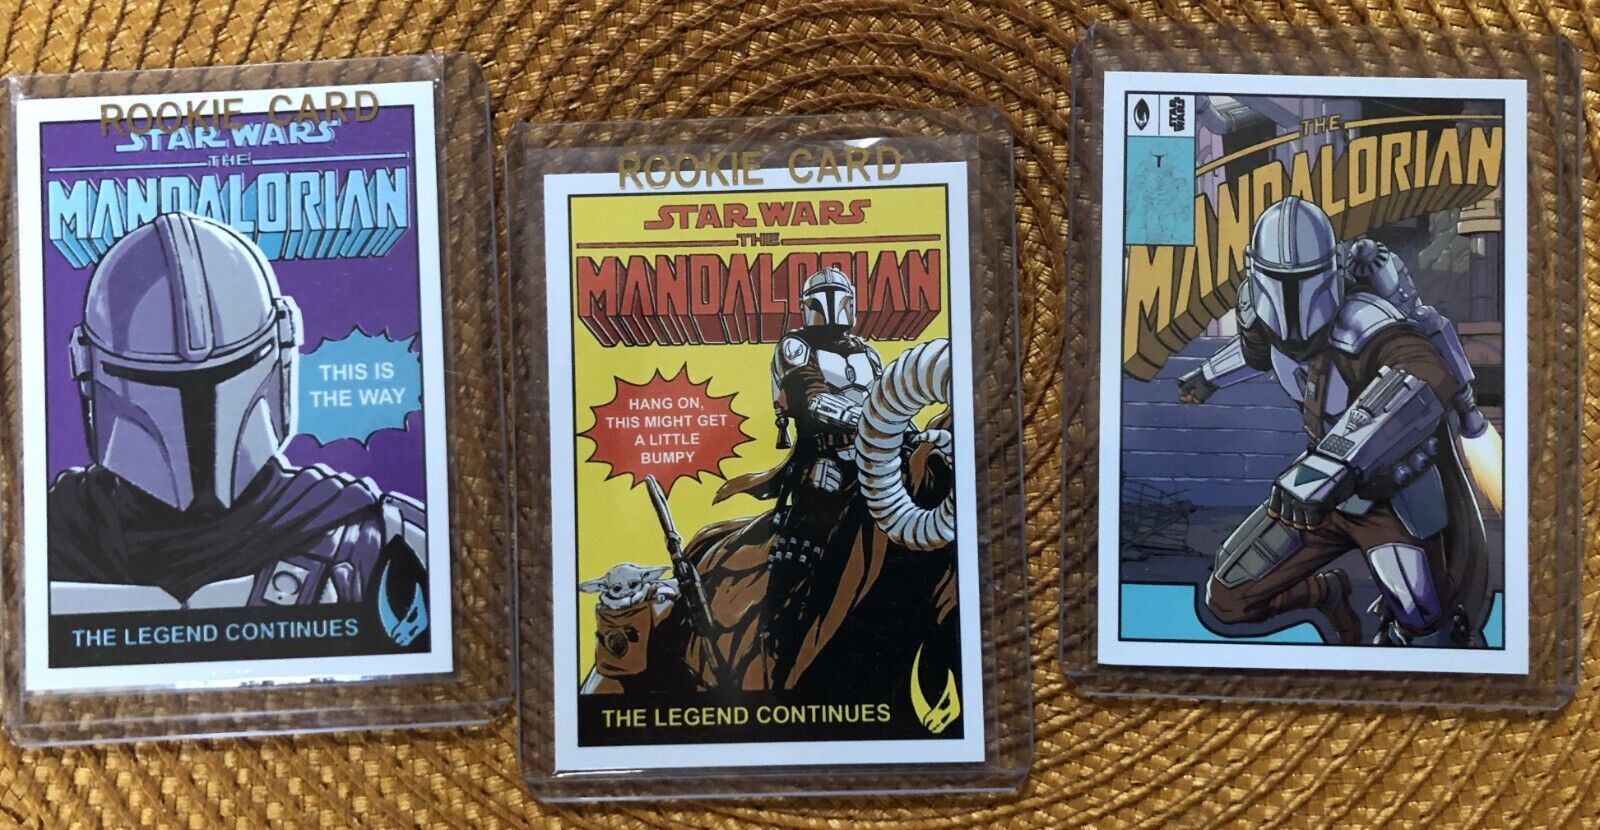 Topps Mandolorian Cards - Inserts, Comic Book Covers - Low Starting Price